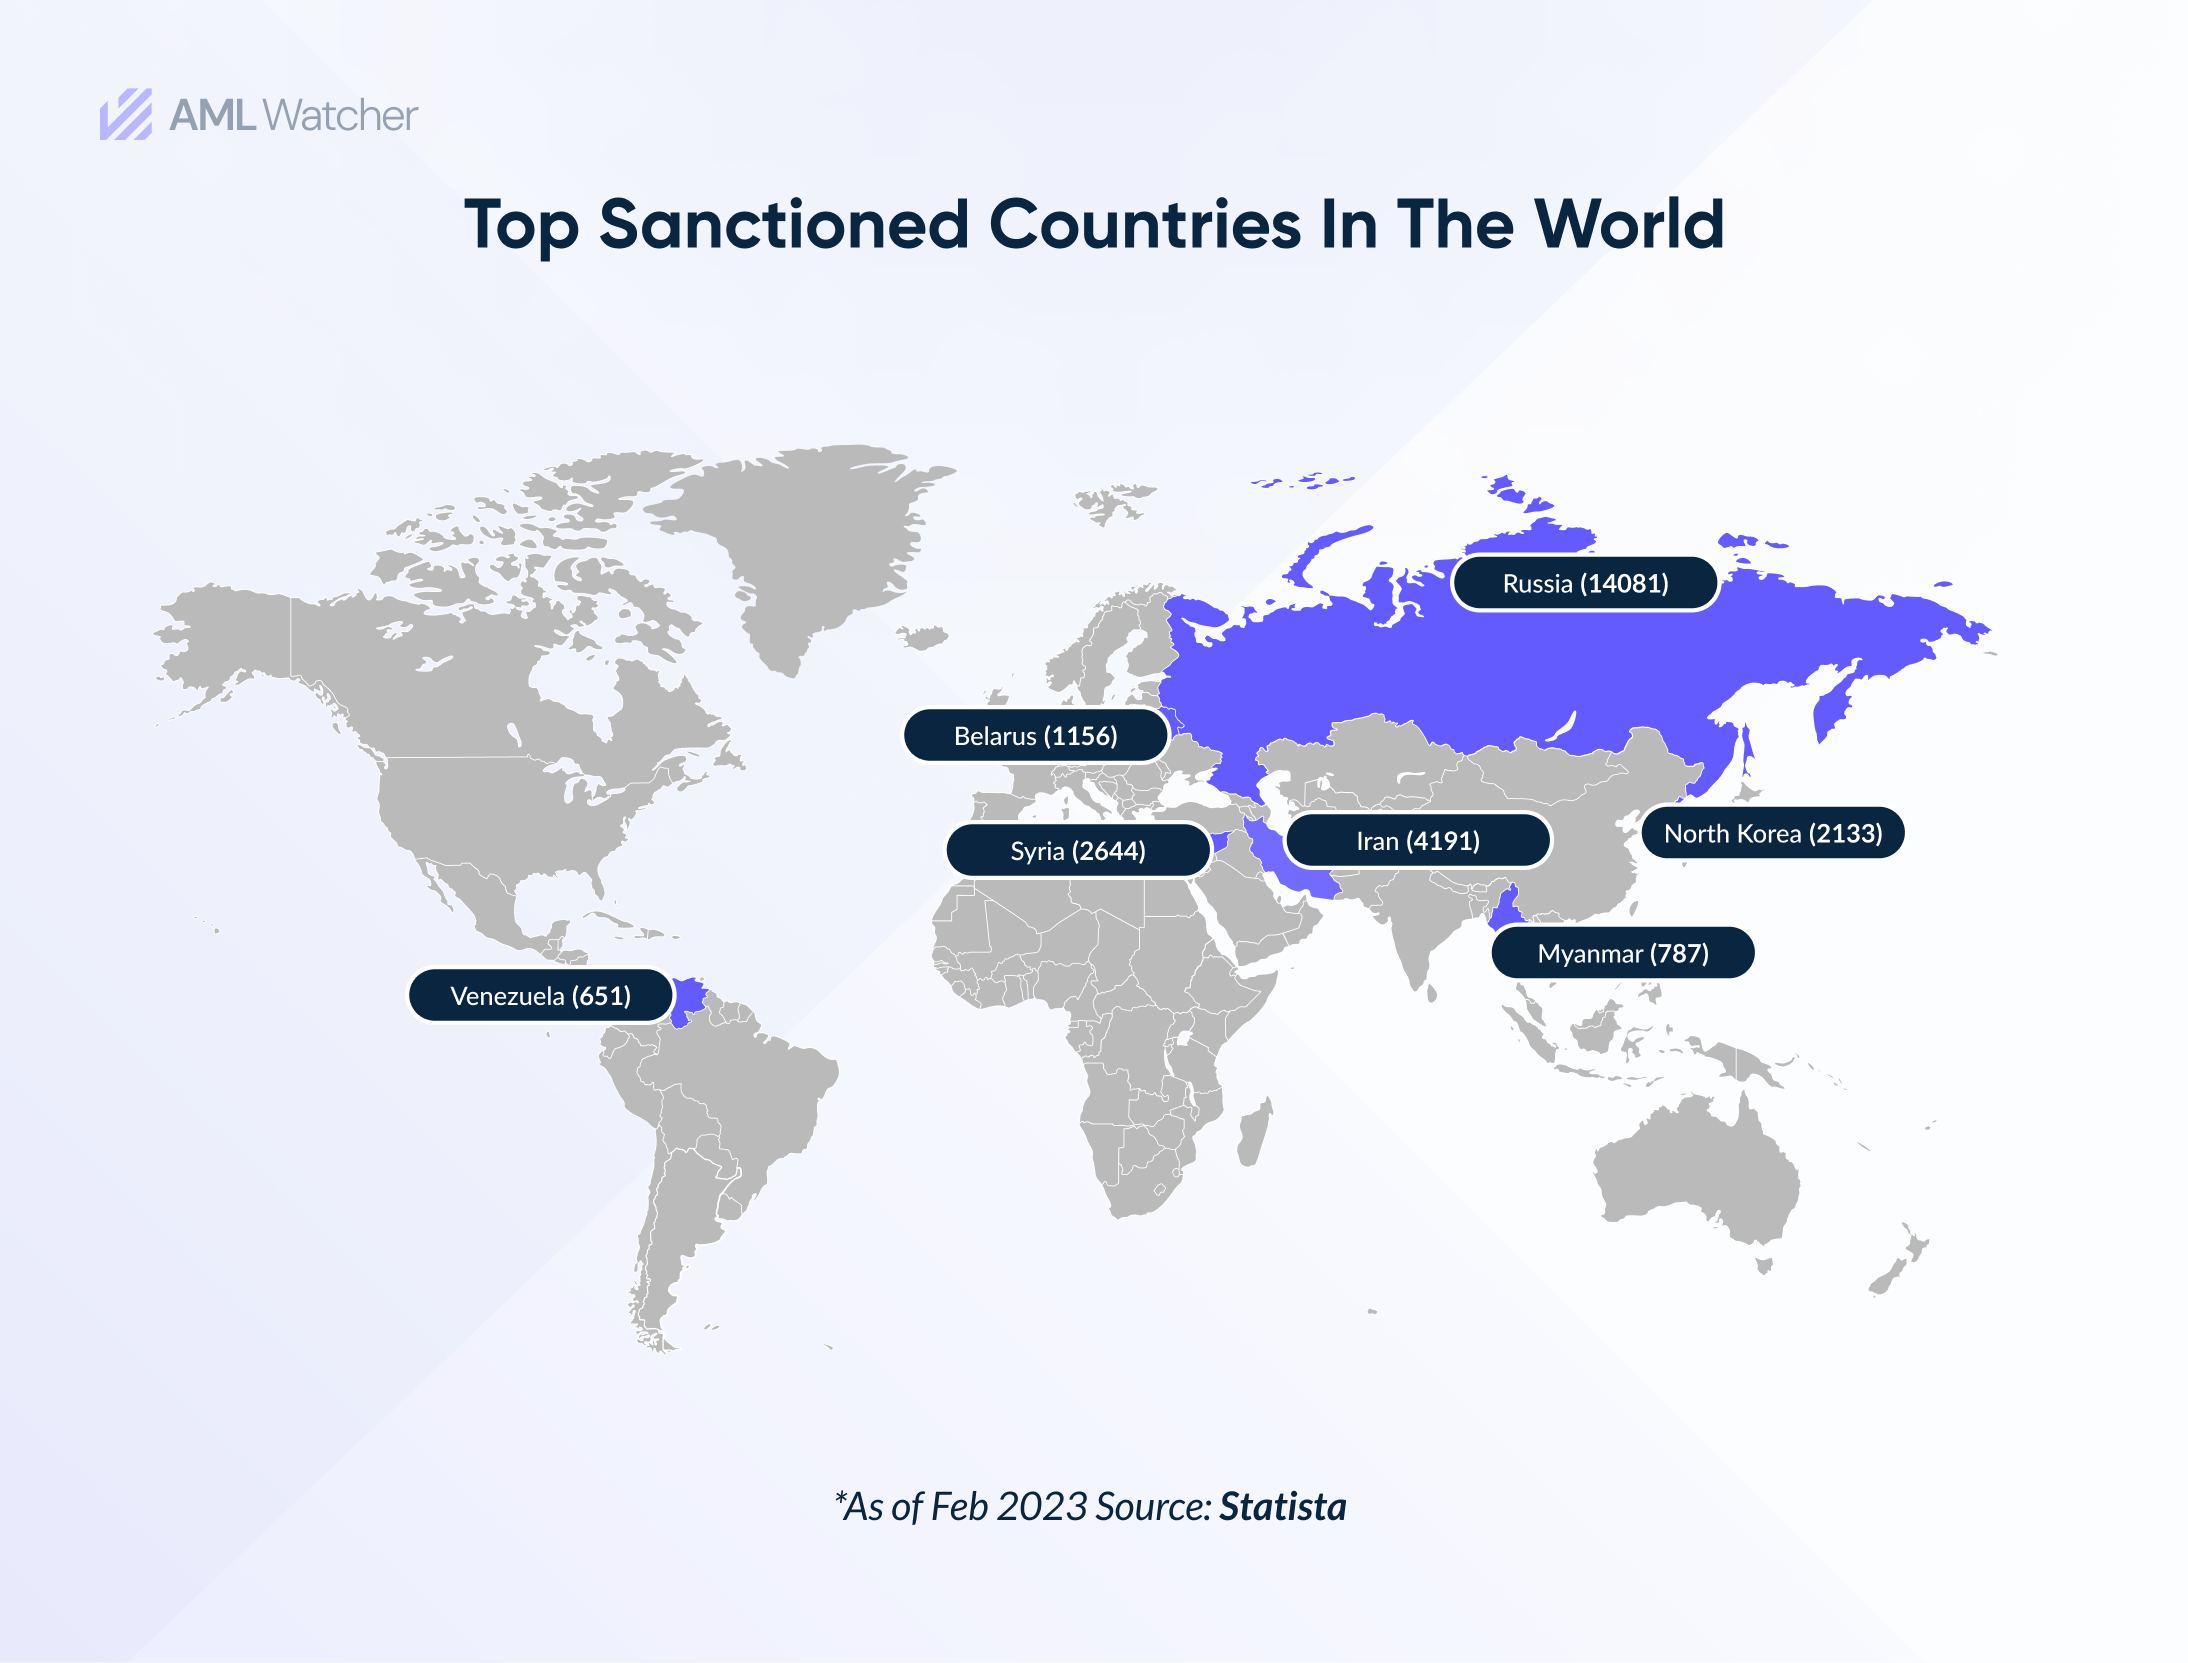 This image shows the top sanctioned countries or regions in the World